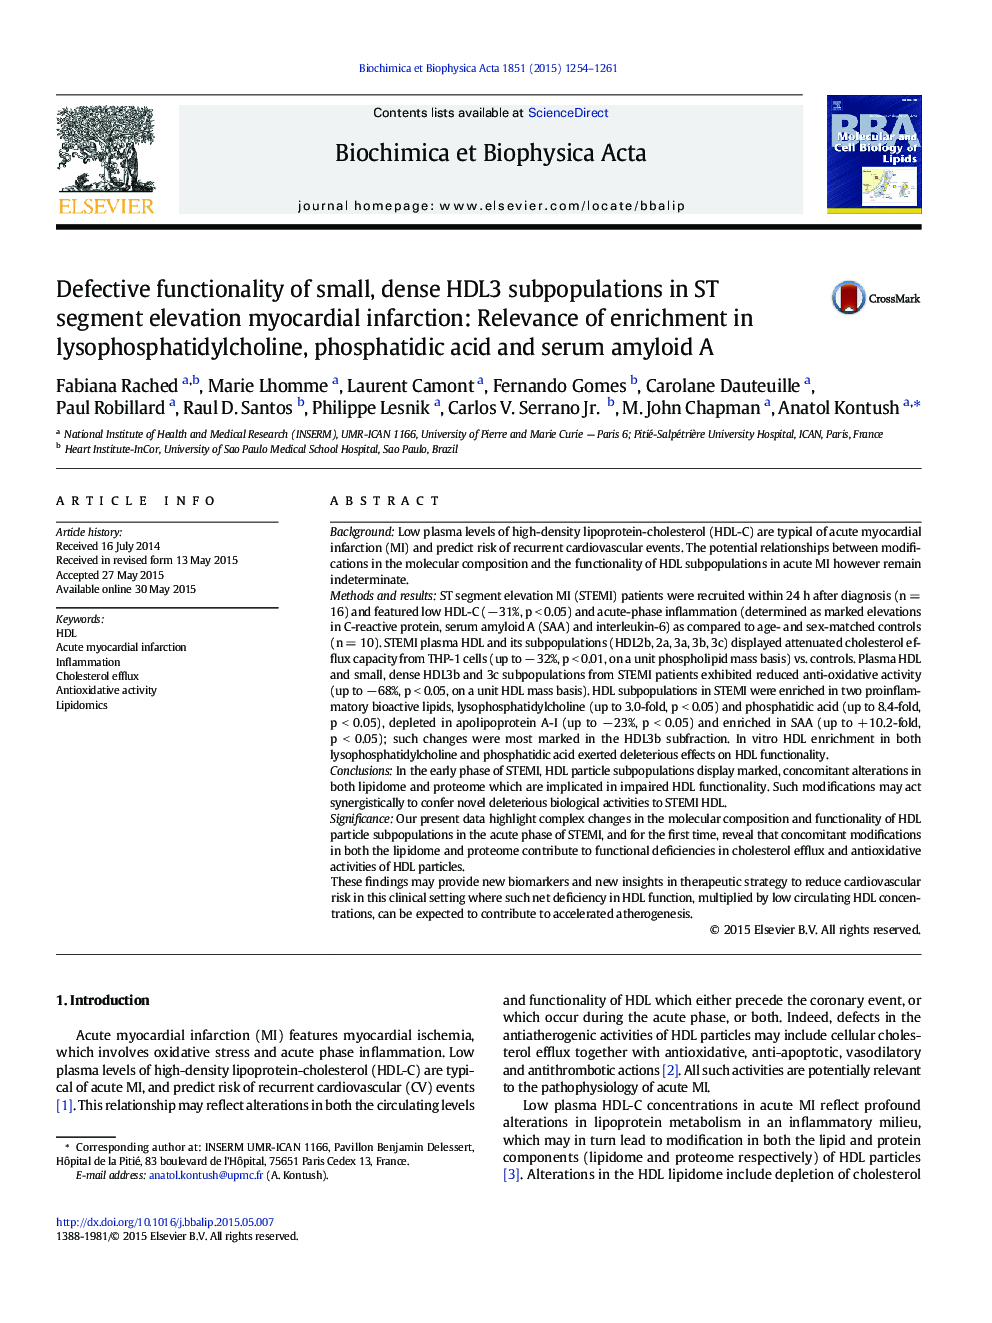 Defective functionality of small, dense HDL3 subpopulations in ST segment elevation myocardial infarction: Relevance of enrichment in lysophosphatidylcholine, phosphatidic acid and serum amyloid A